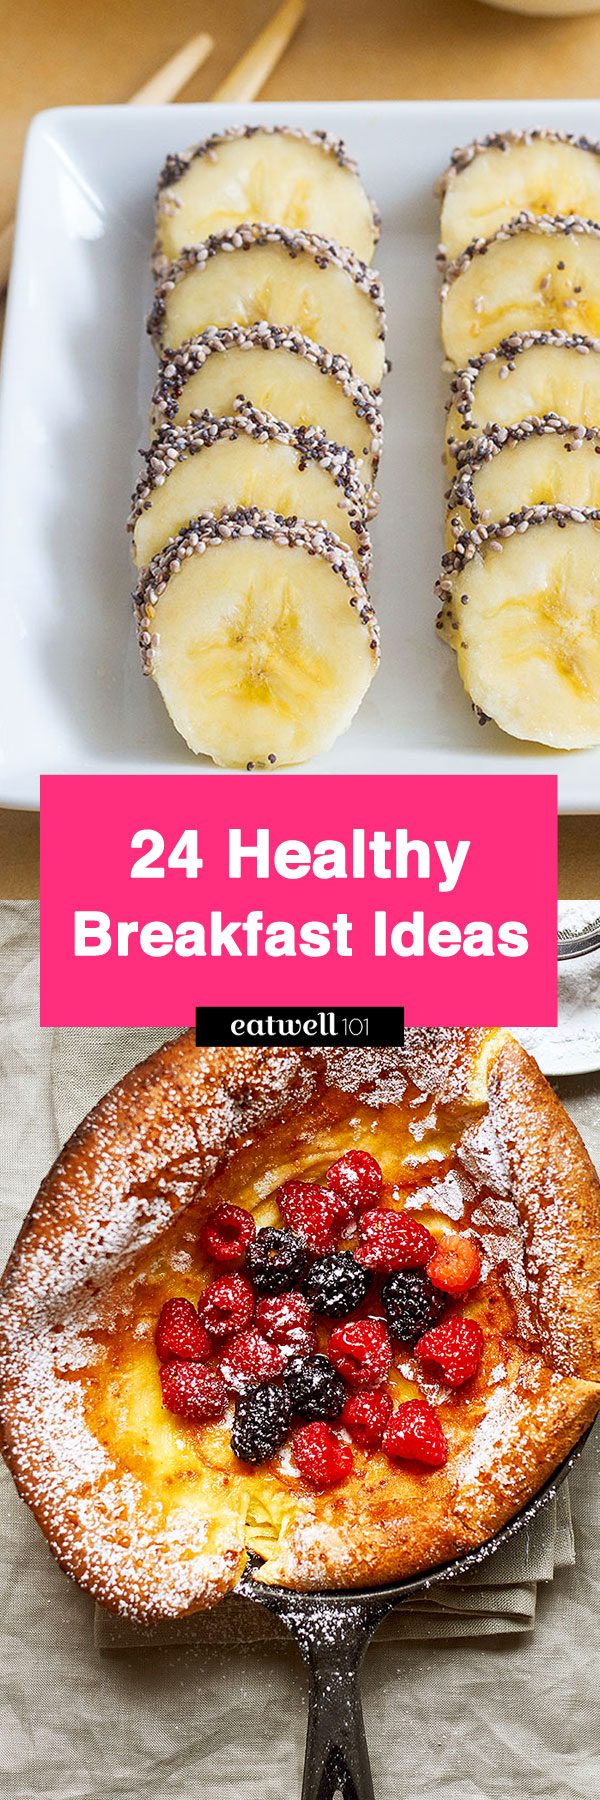 Healthy breakfast ideas - Start the morning off right with a filling and healthy breakfast packed with good-for-you nutrients